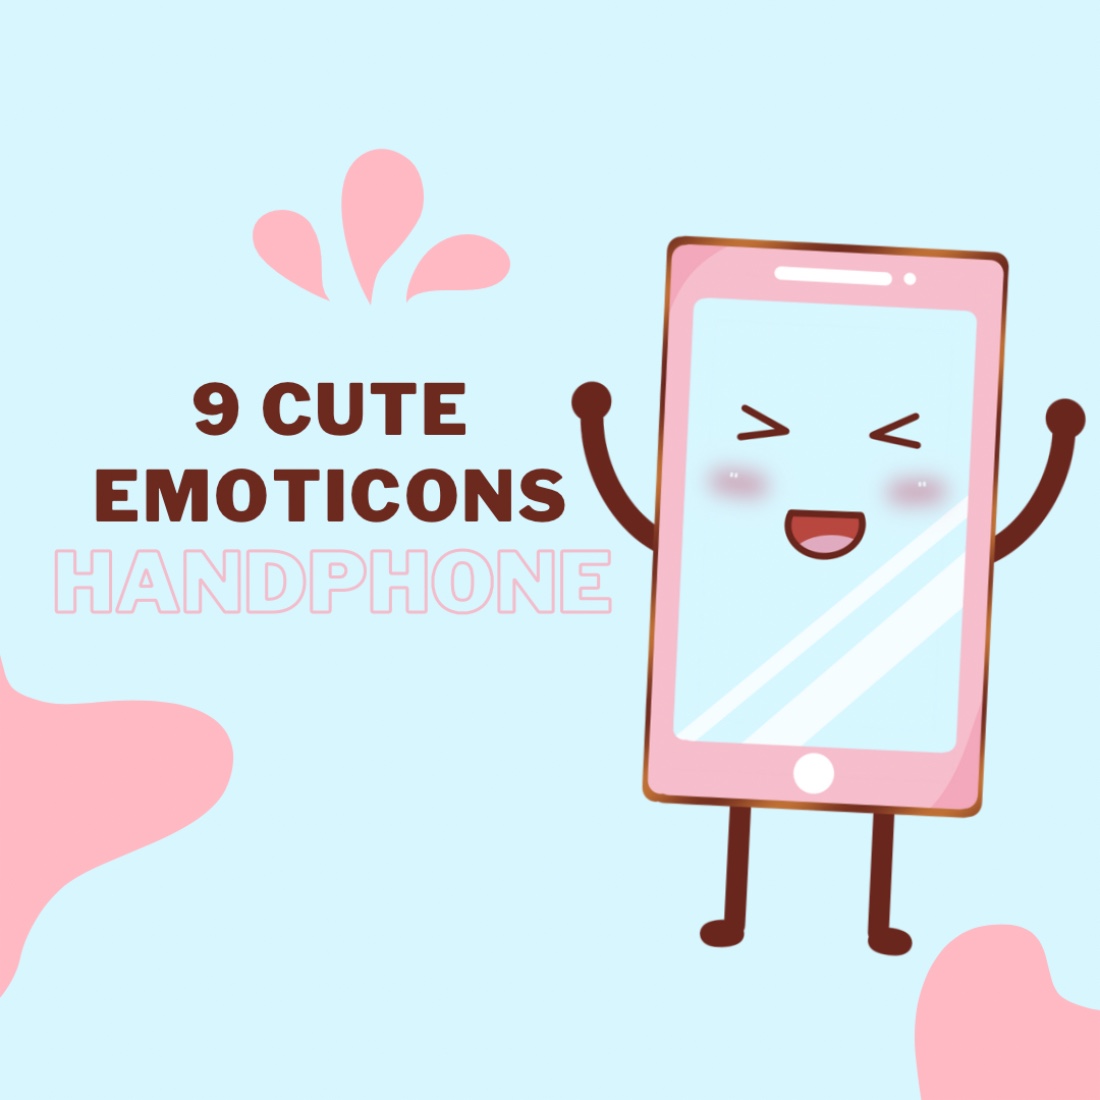 9 Cute Emoticons with Character Handphone and 2 Free GIF - Only $5 cover image.